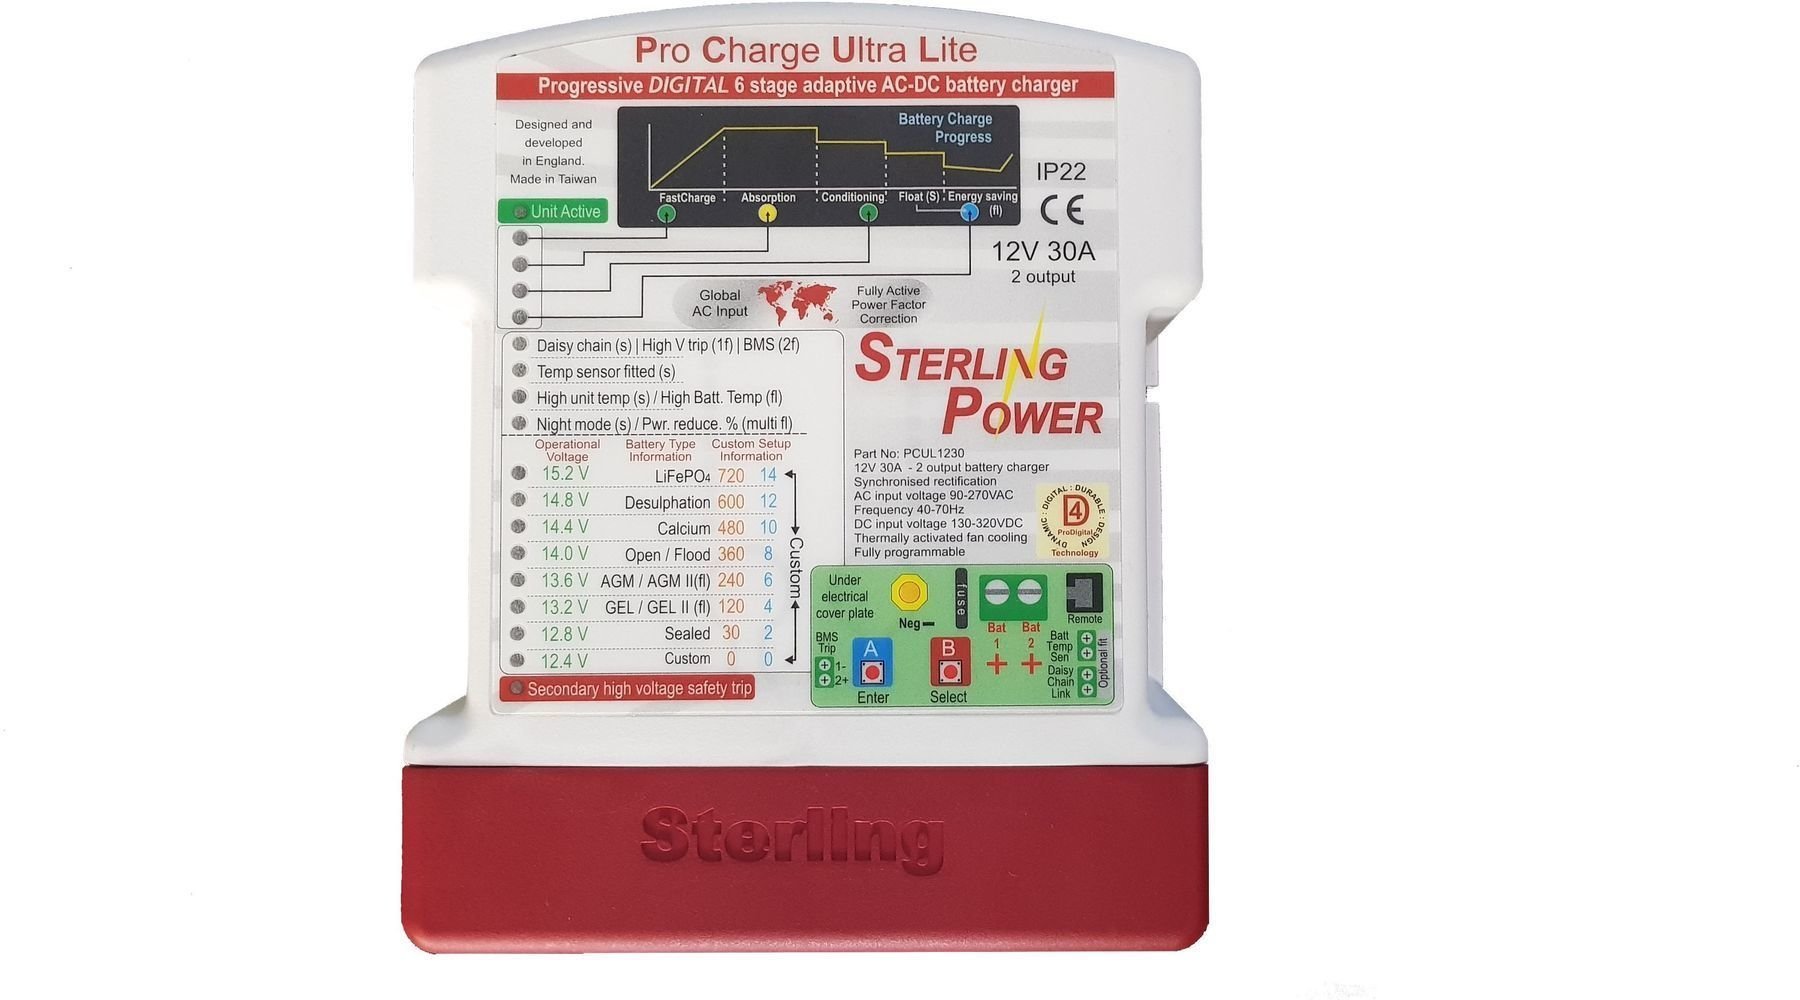 Marine Battery Charger Sterling Power Pro Charge Ultra Lite